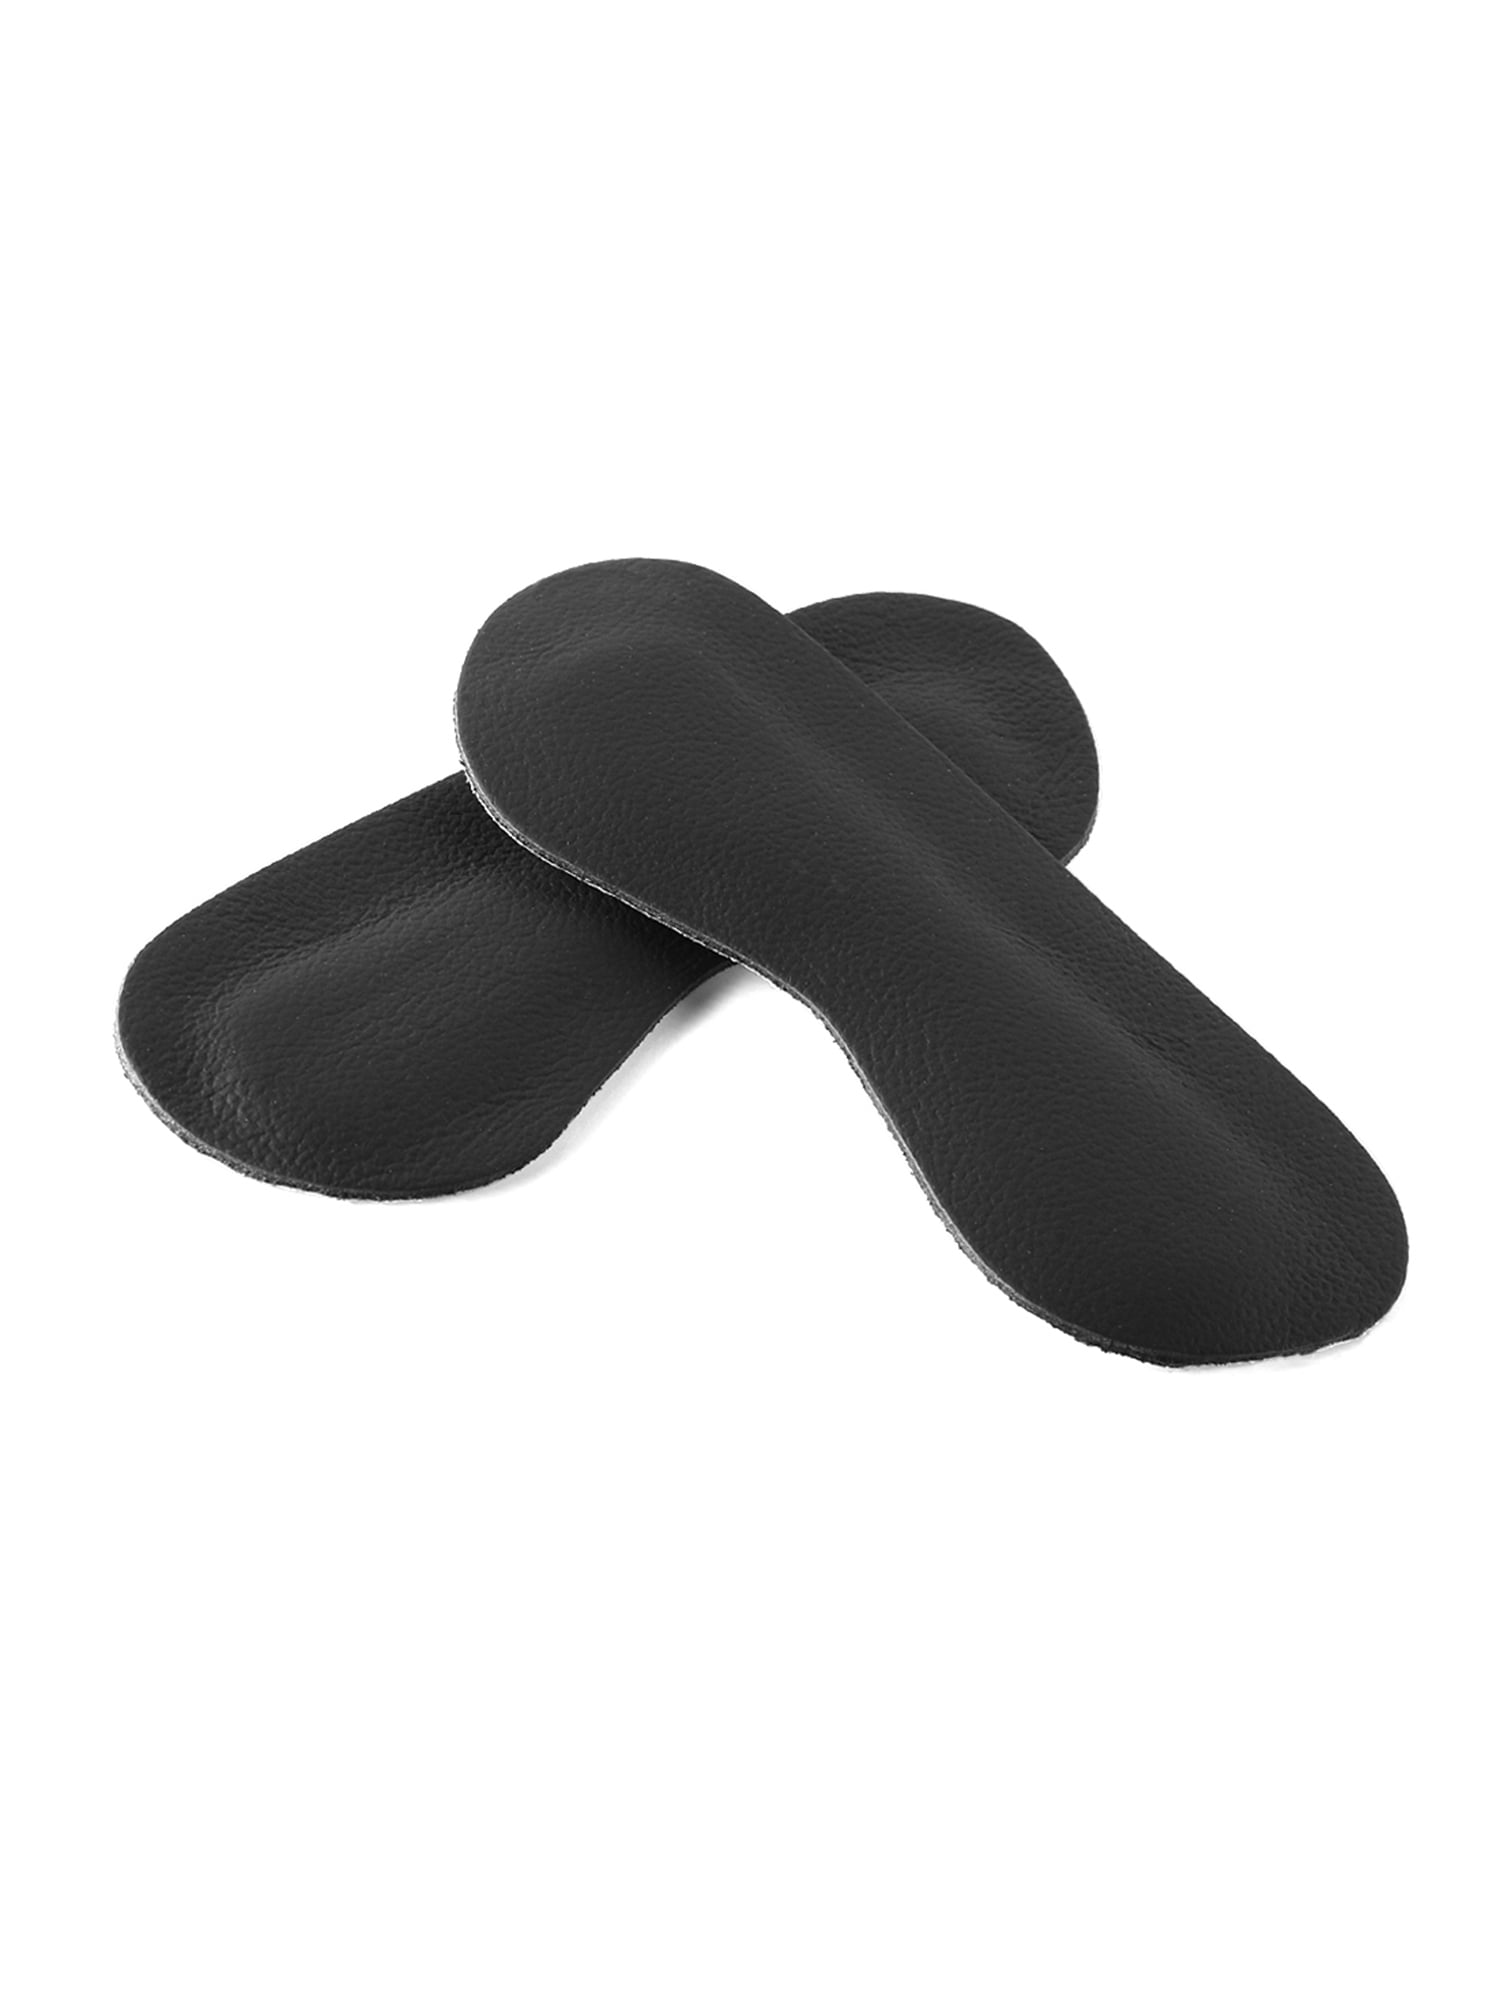 leather heel insoles